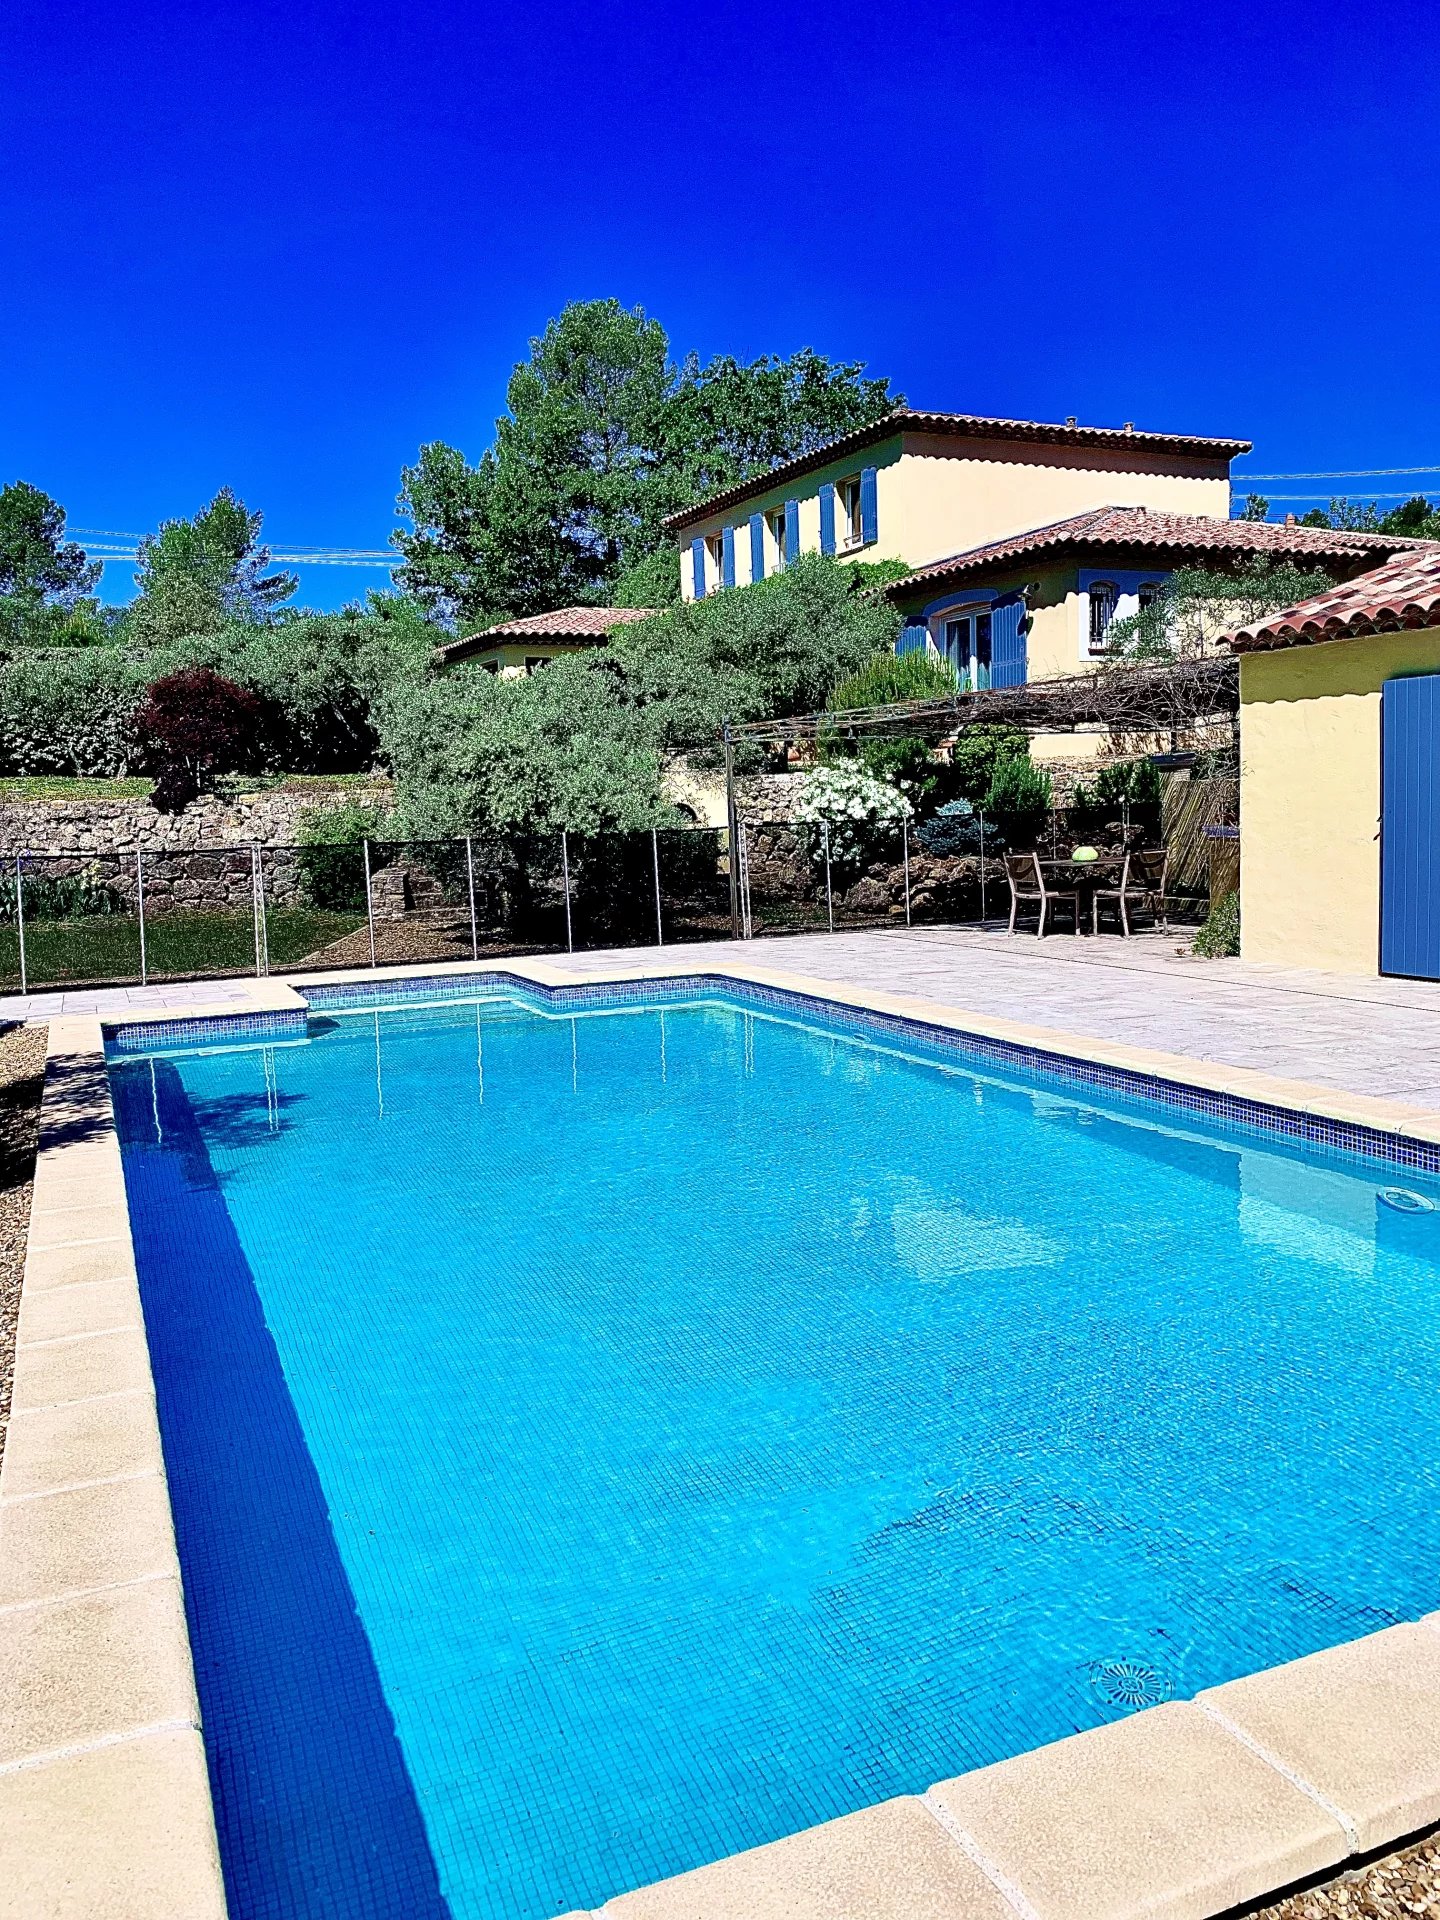 Provencal villa offering high quality fittings, in a quiet area.